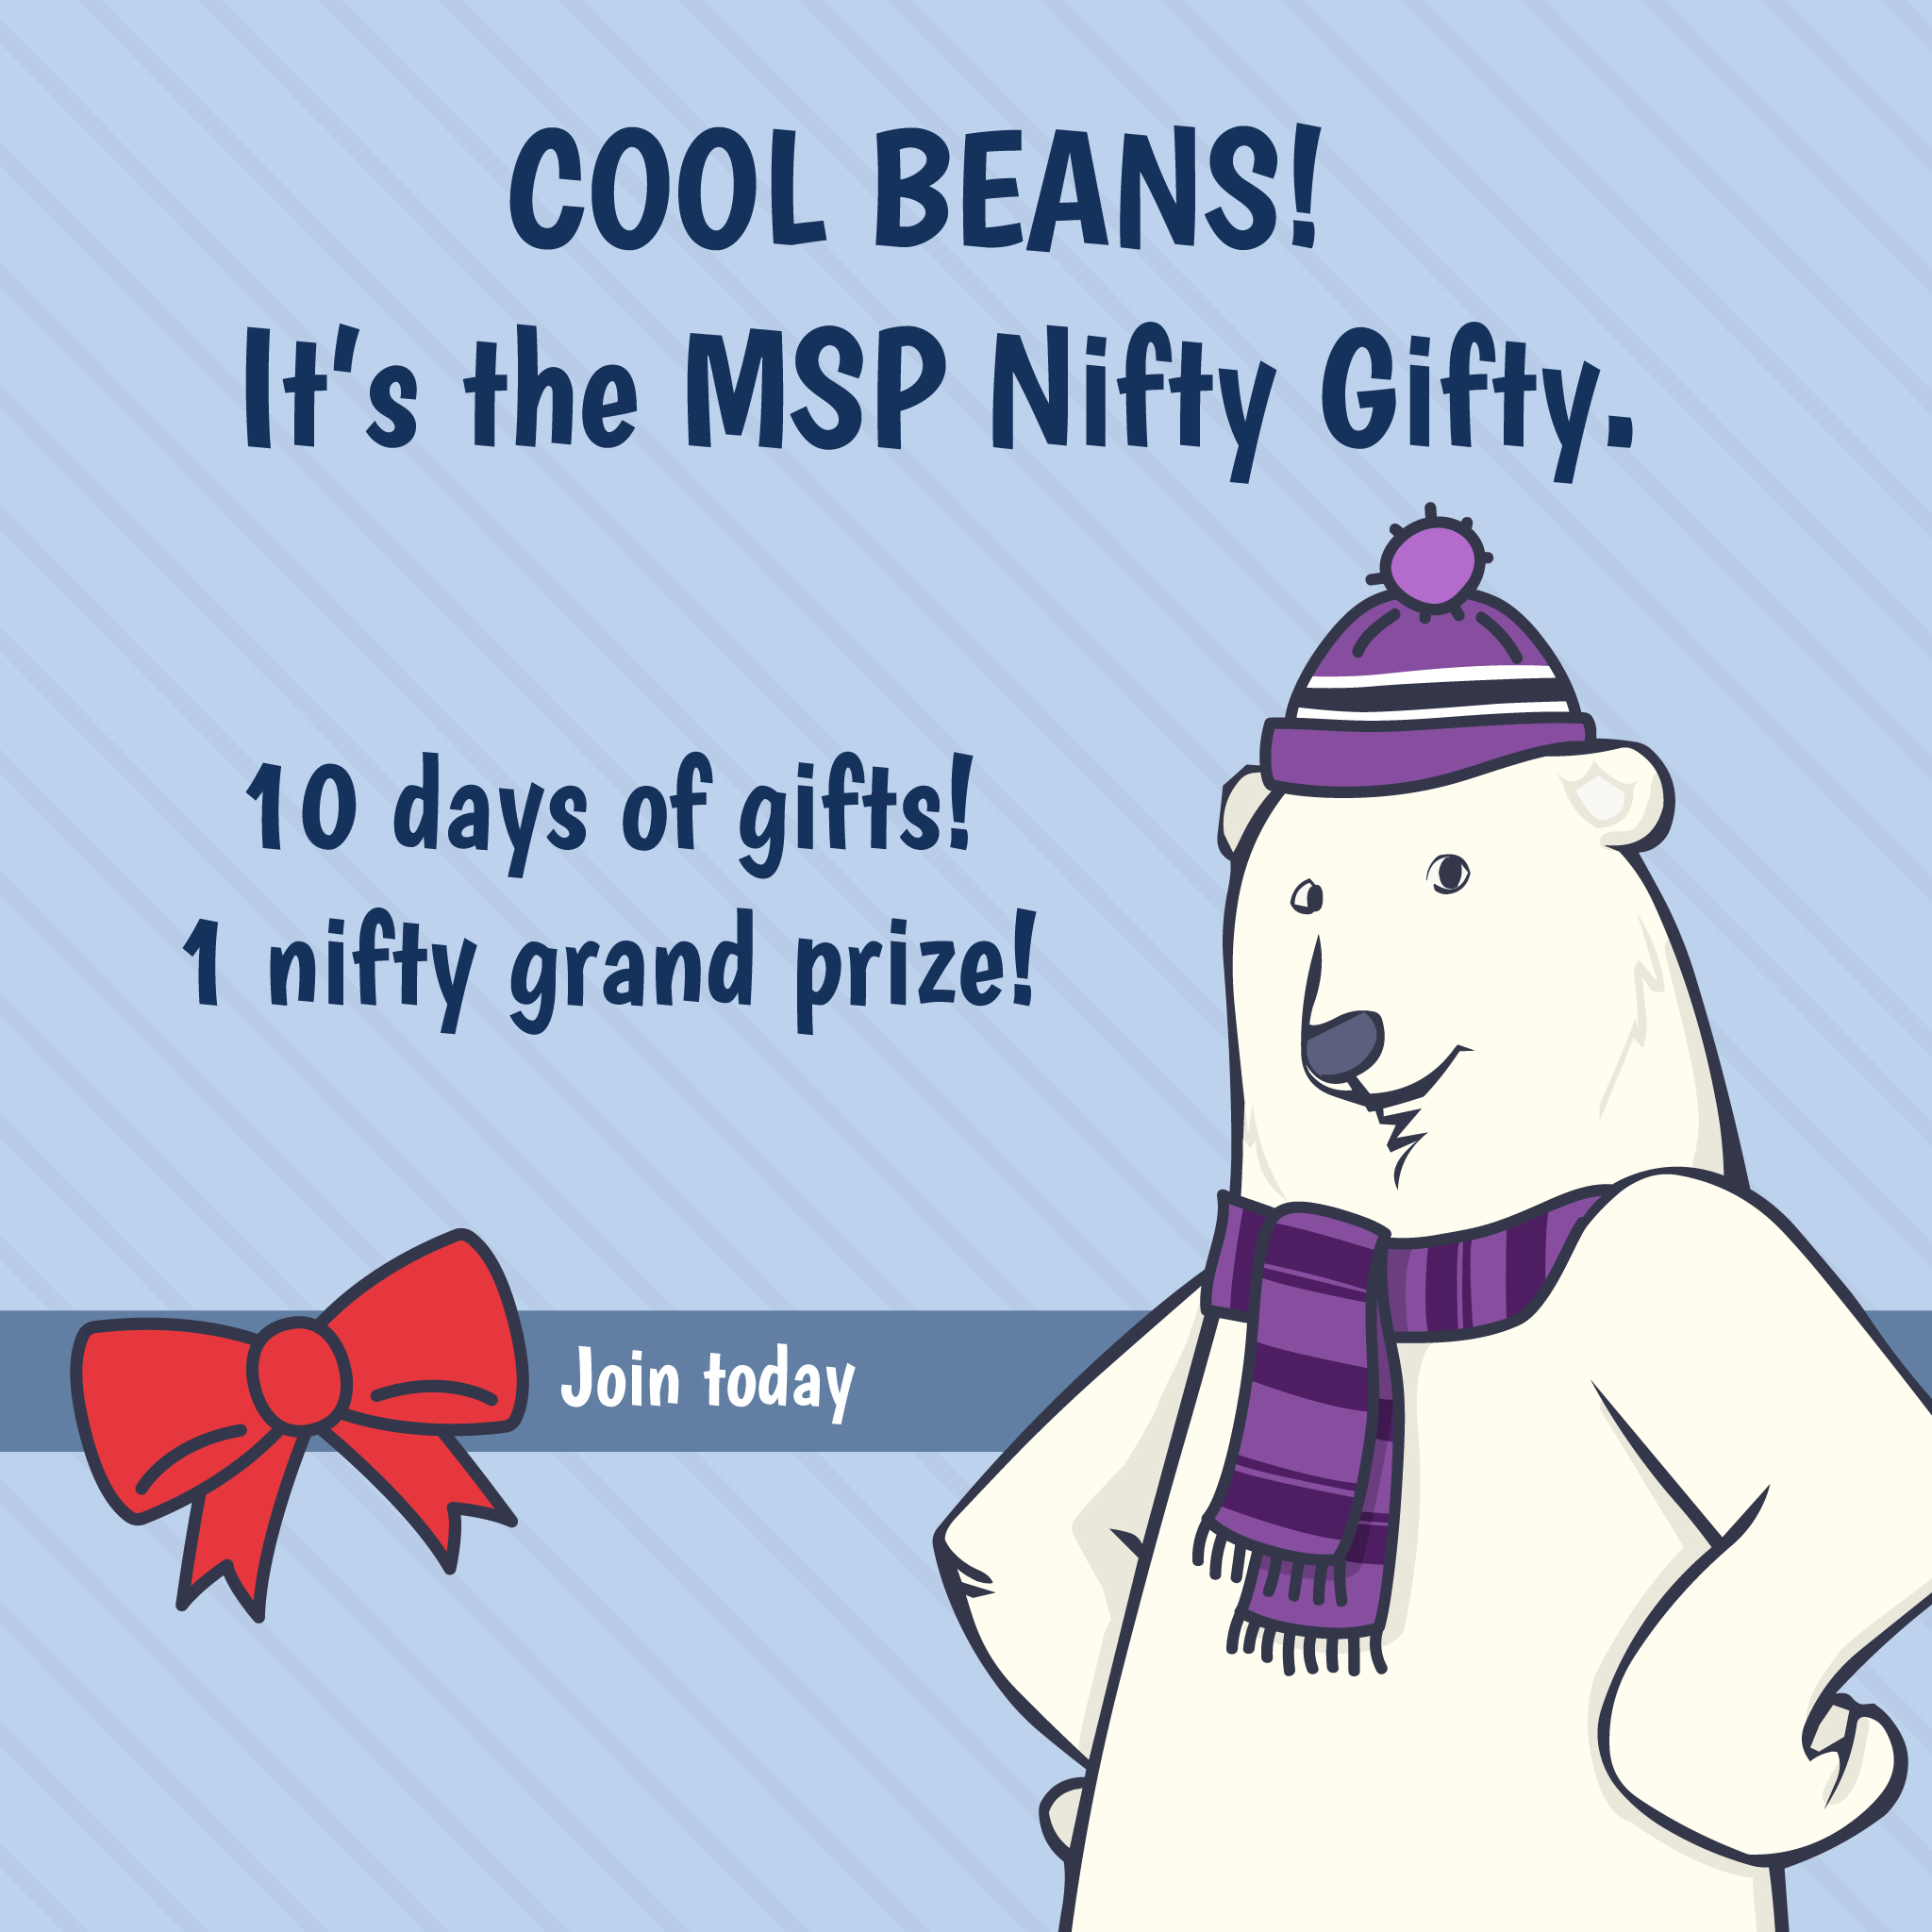 Cool-beans-Nifty-Gifty-2019-Instagram-1